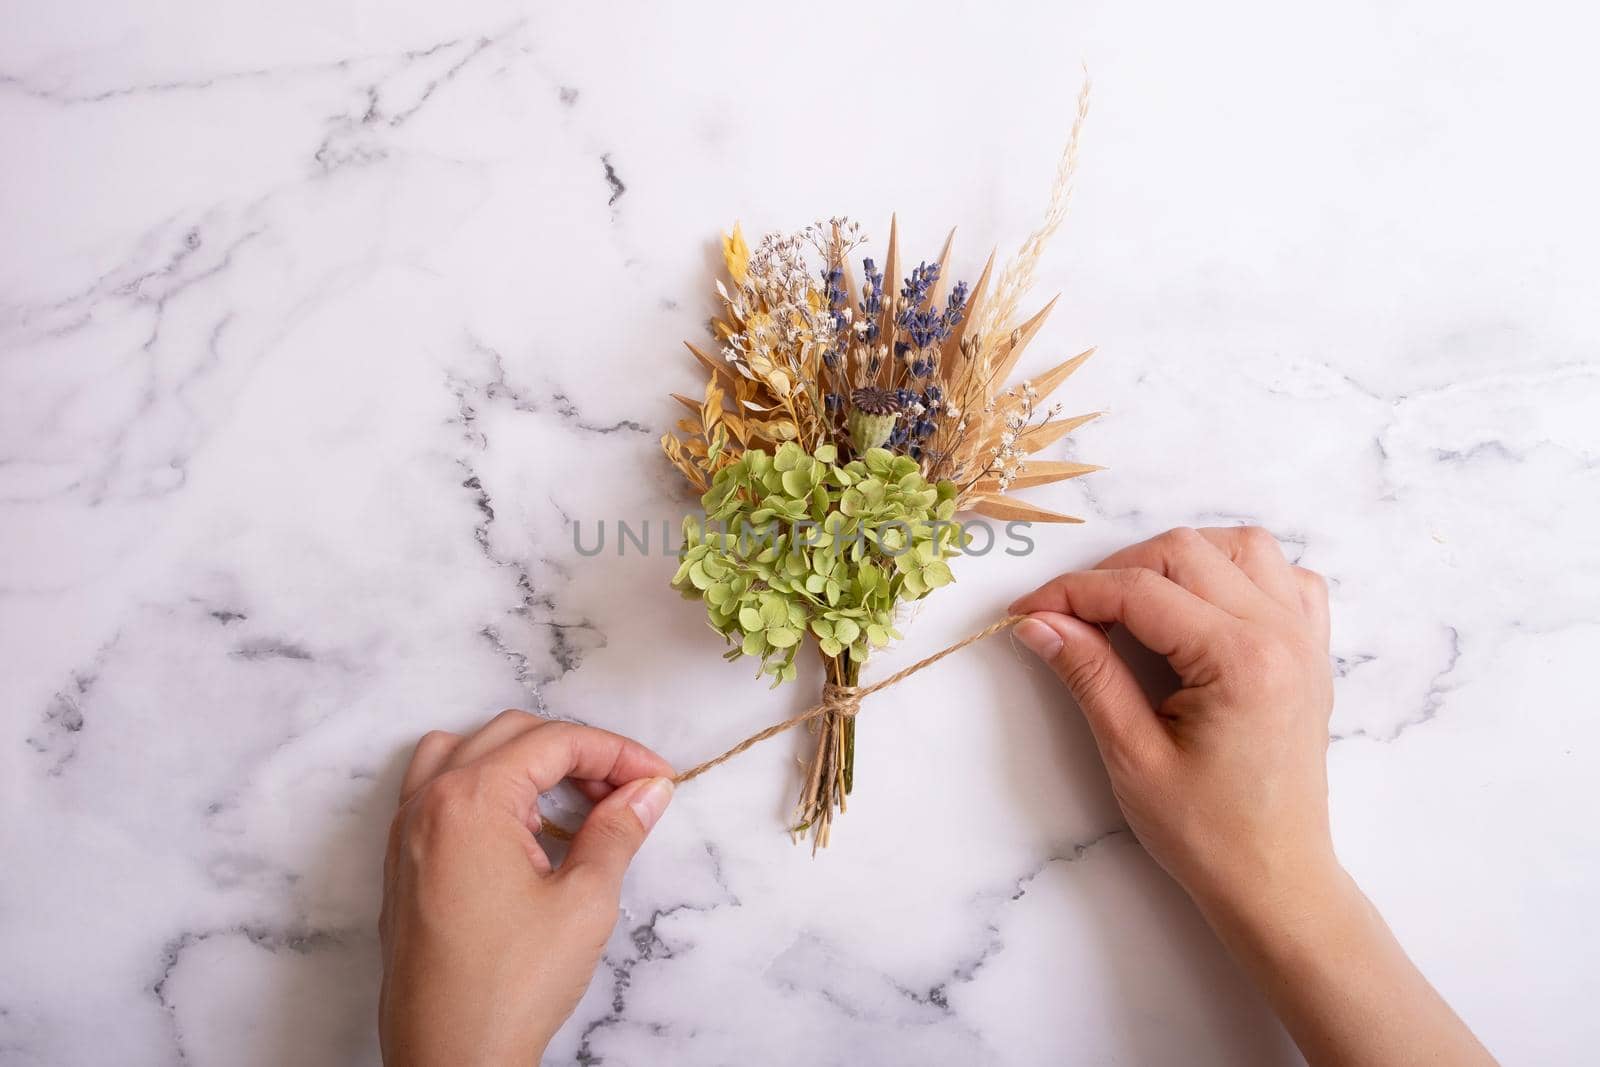 Making a bouquet of dry flowers and herbs